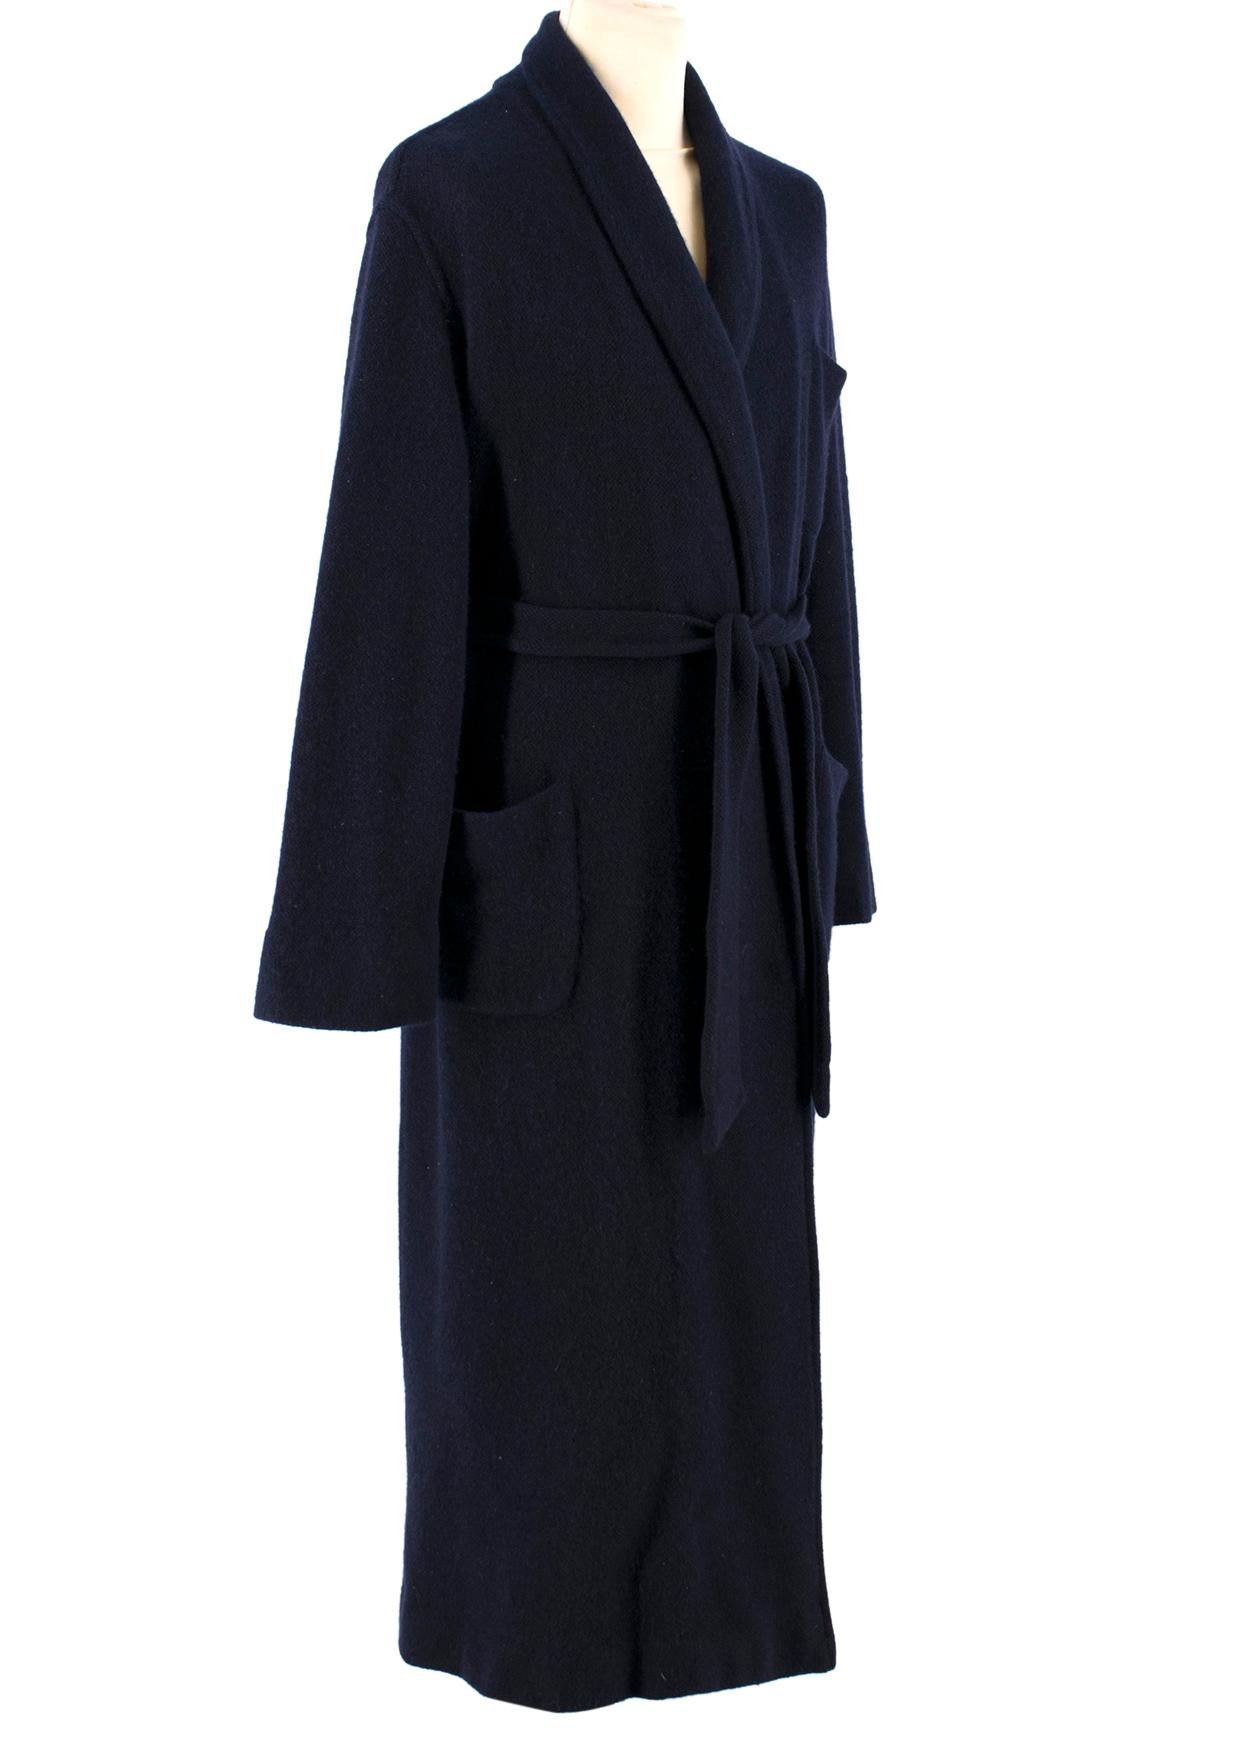 Loro Piana Navy Cashmere Tie Waist Cardigan 

- Navy Oversize Robe Cardigan 
- 100% Cashmere 
- Tie Waist 
- Shawl collar
-3 side pockets 
- Long sleeved 

Please note, these items are pre-owned and may show some signs of storage, even when unworn